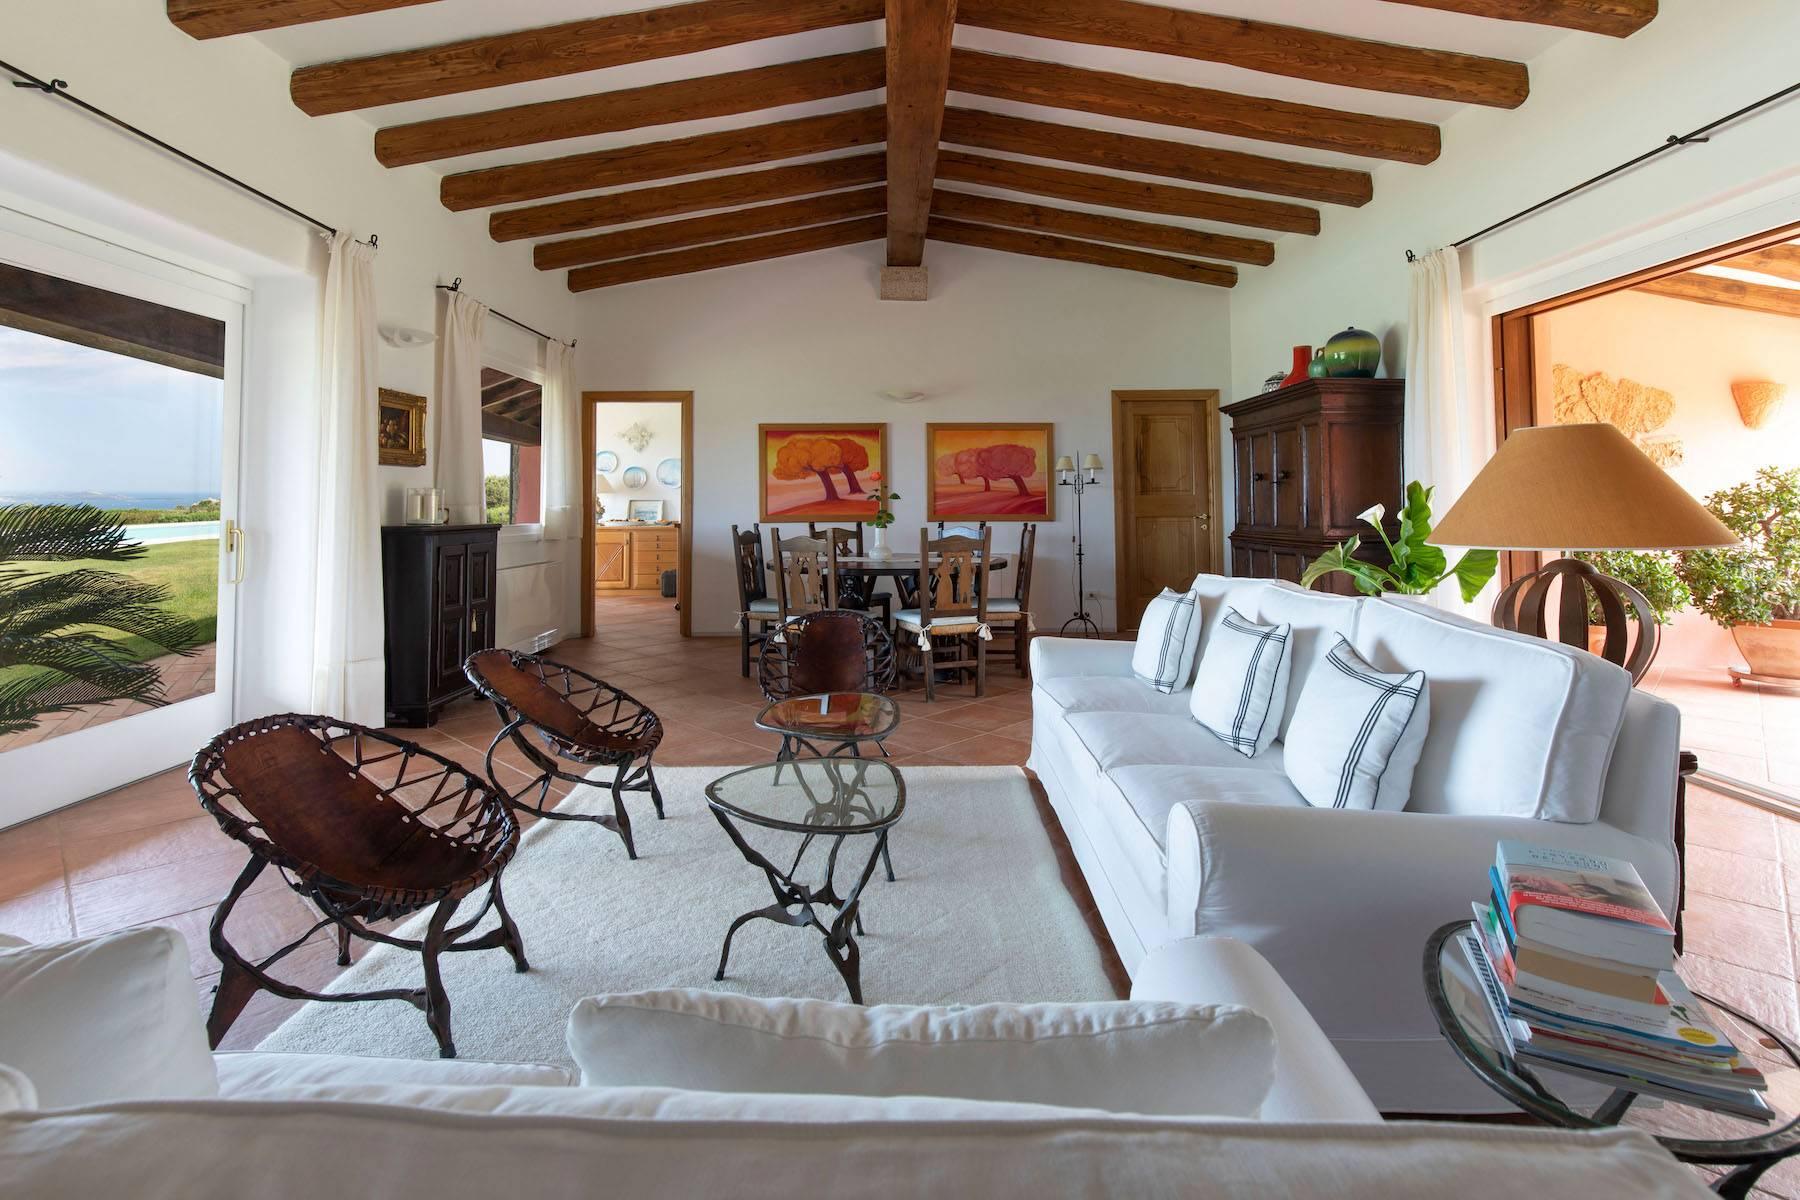 Incredible property of 3 hectares, just a few kilometers from the Costa Smeralda - 5